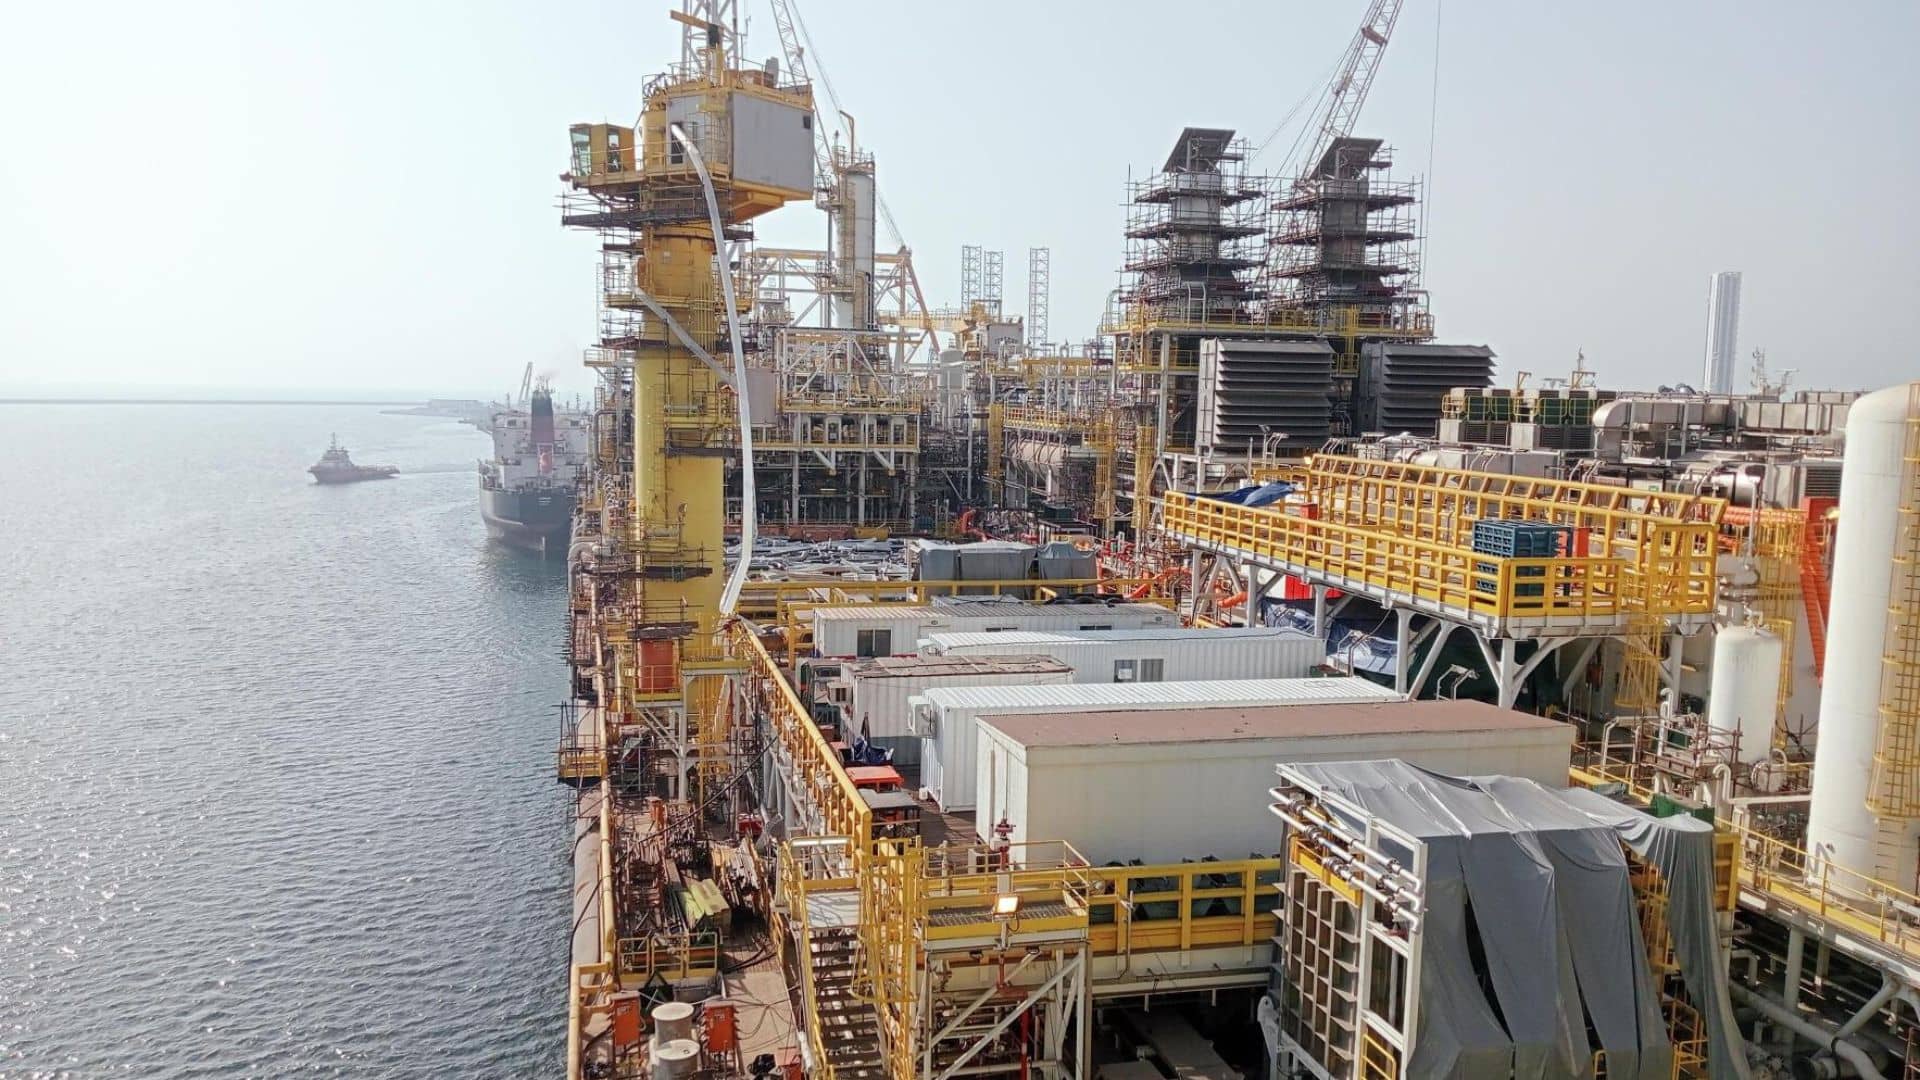 PAGA systems for FPSO vessels